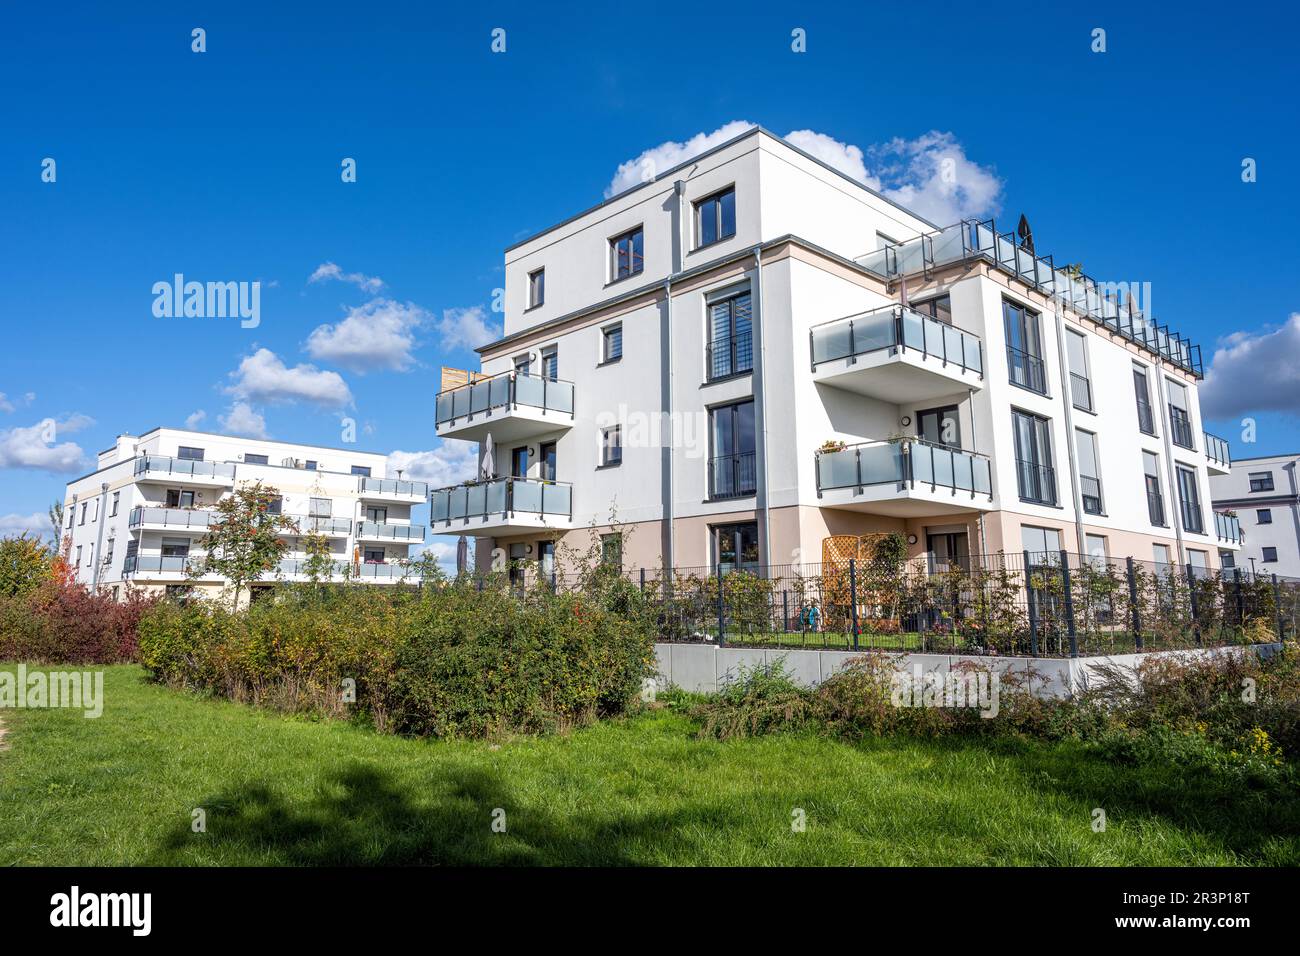 Small multi-family apartment buildings in a development area seen in Berlin, Germany Stock Photo